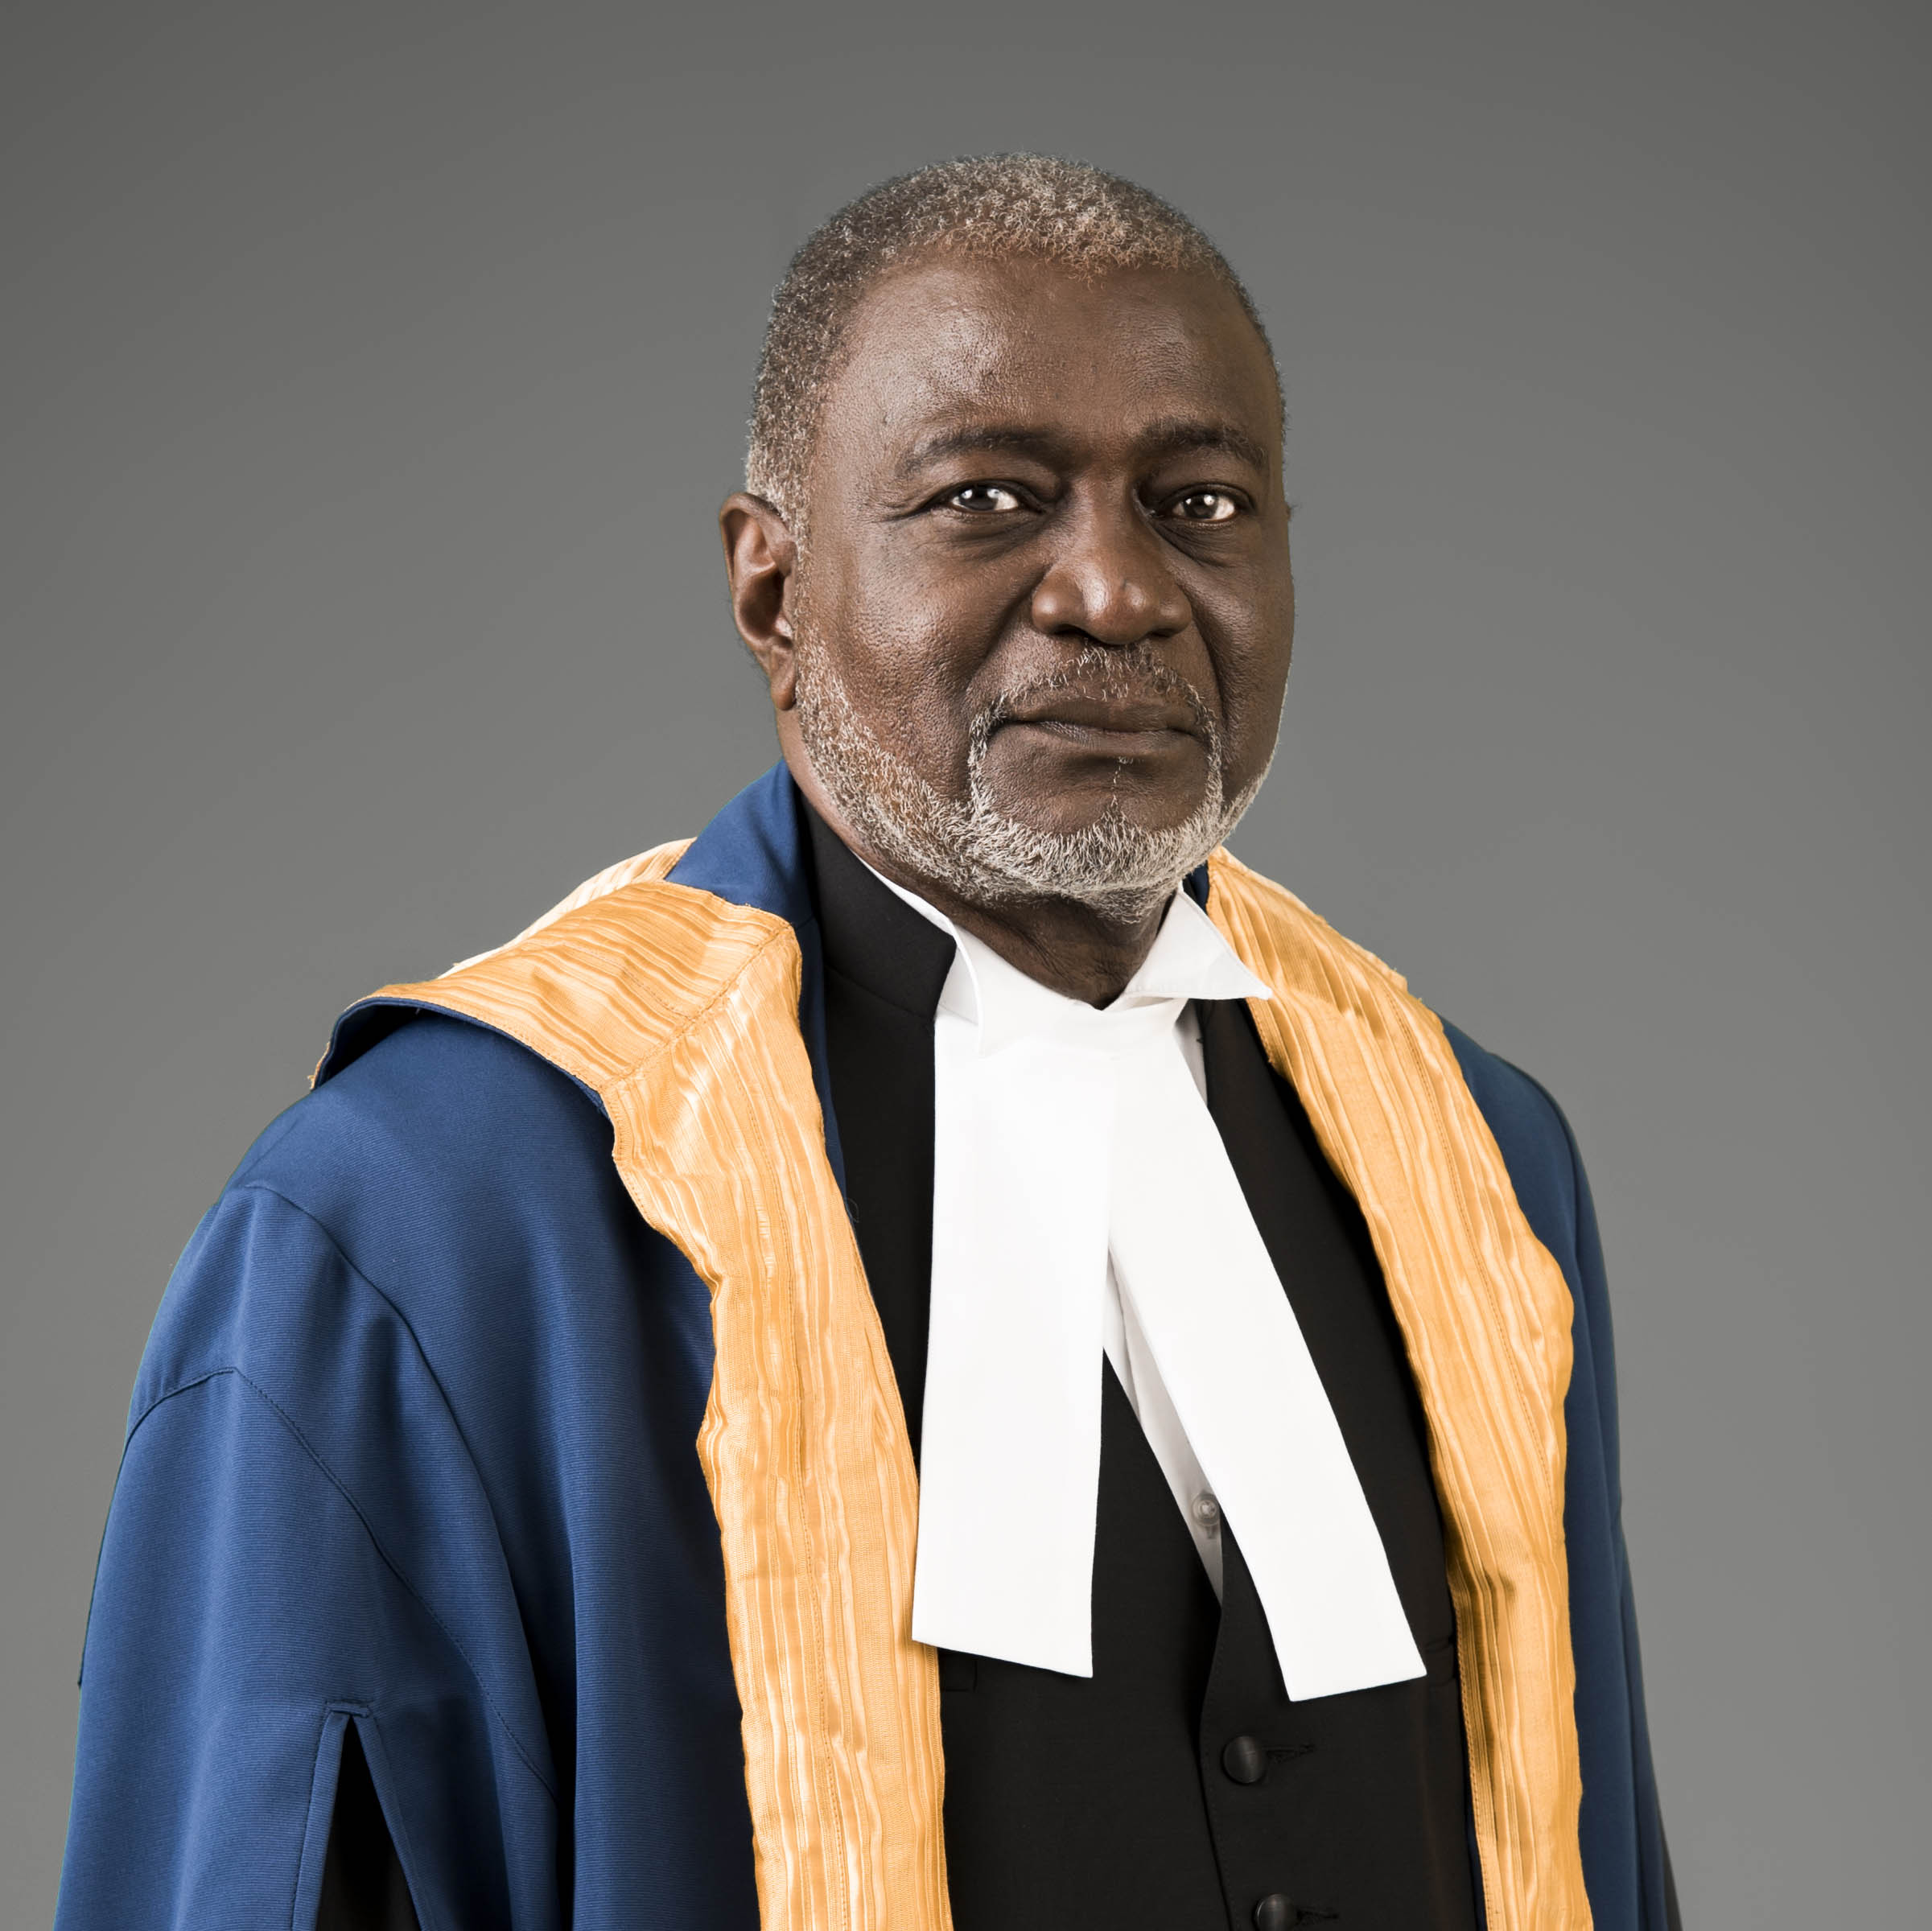 The Honourable Mr. Justice Andrew Burgess